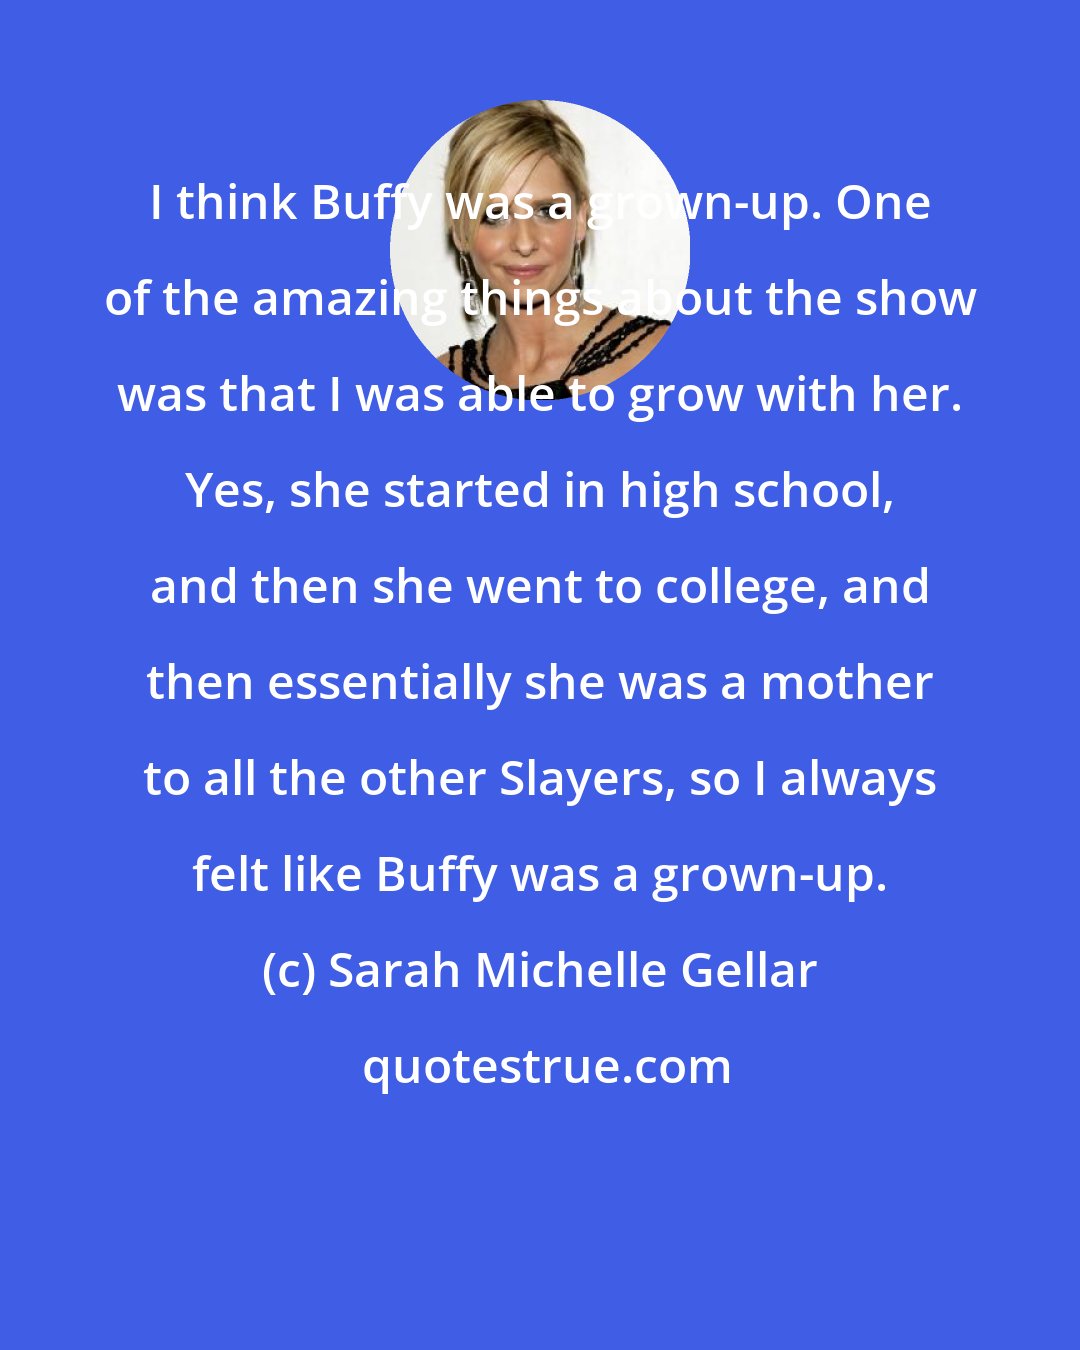 Sarah Michelle Gellar: I think Buffy was a grown-up. One of the amazing things about the show was that I was able to grow with her. Yes, she started in high school, and then she went to college, and then essentially she was a mother to all the other Slayers, so I always felt like Buffy was a grown-up.